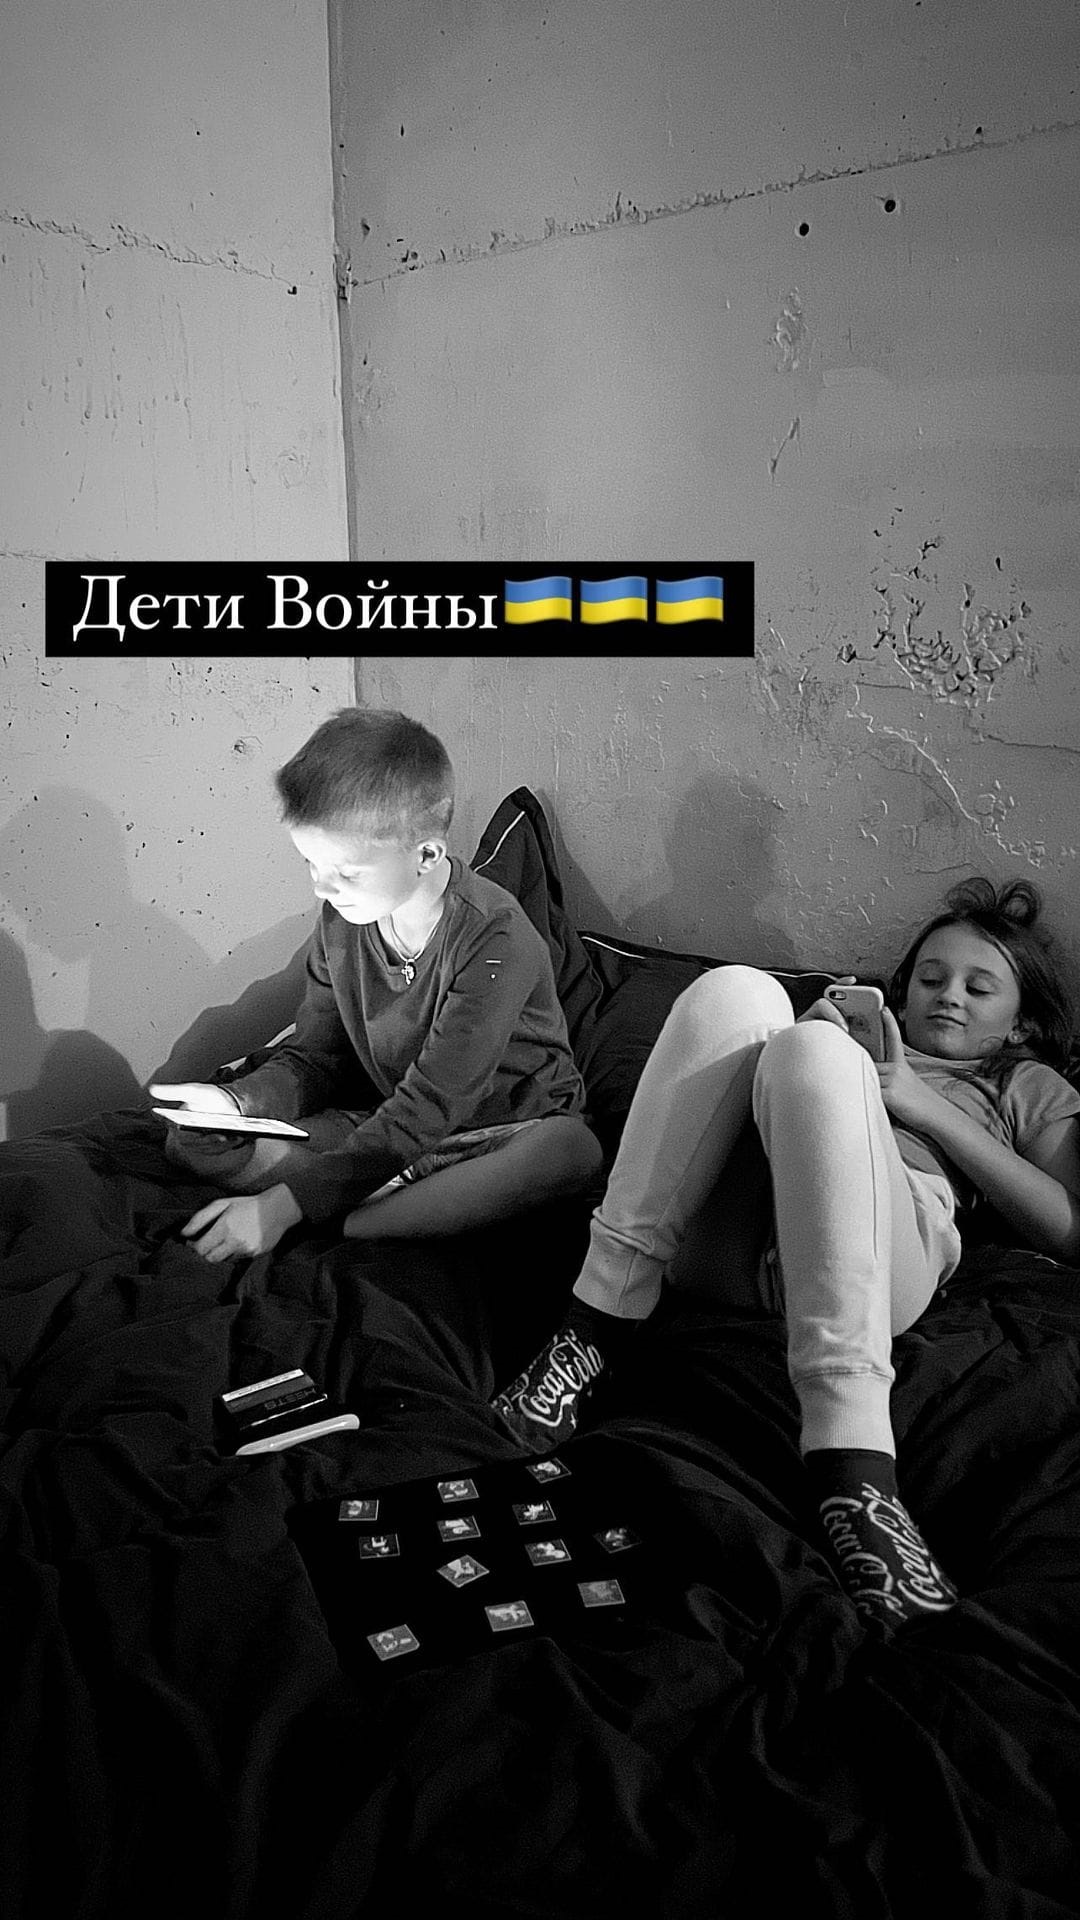 Daddy, why are they trying to kill us? - The terror of Usyk children as bombs were dropped in Ukraine and Russians ransacked their house